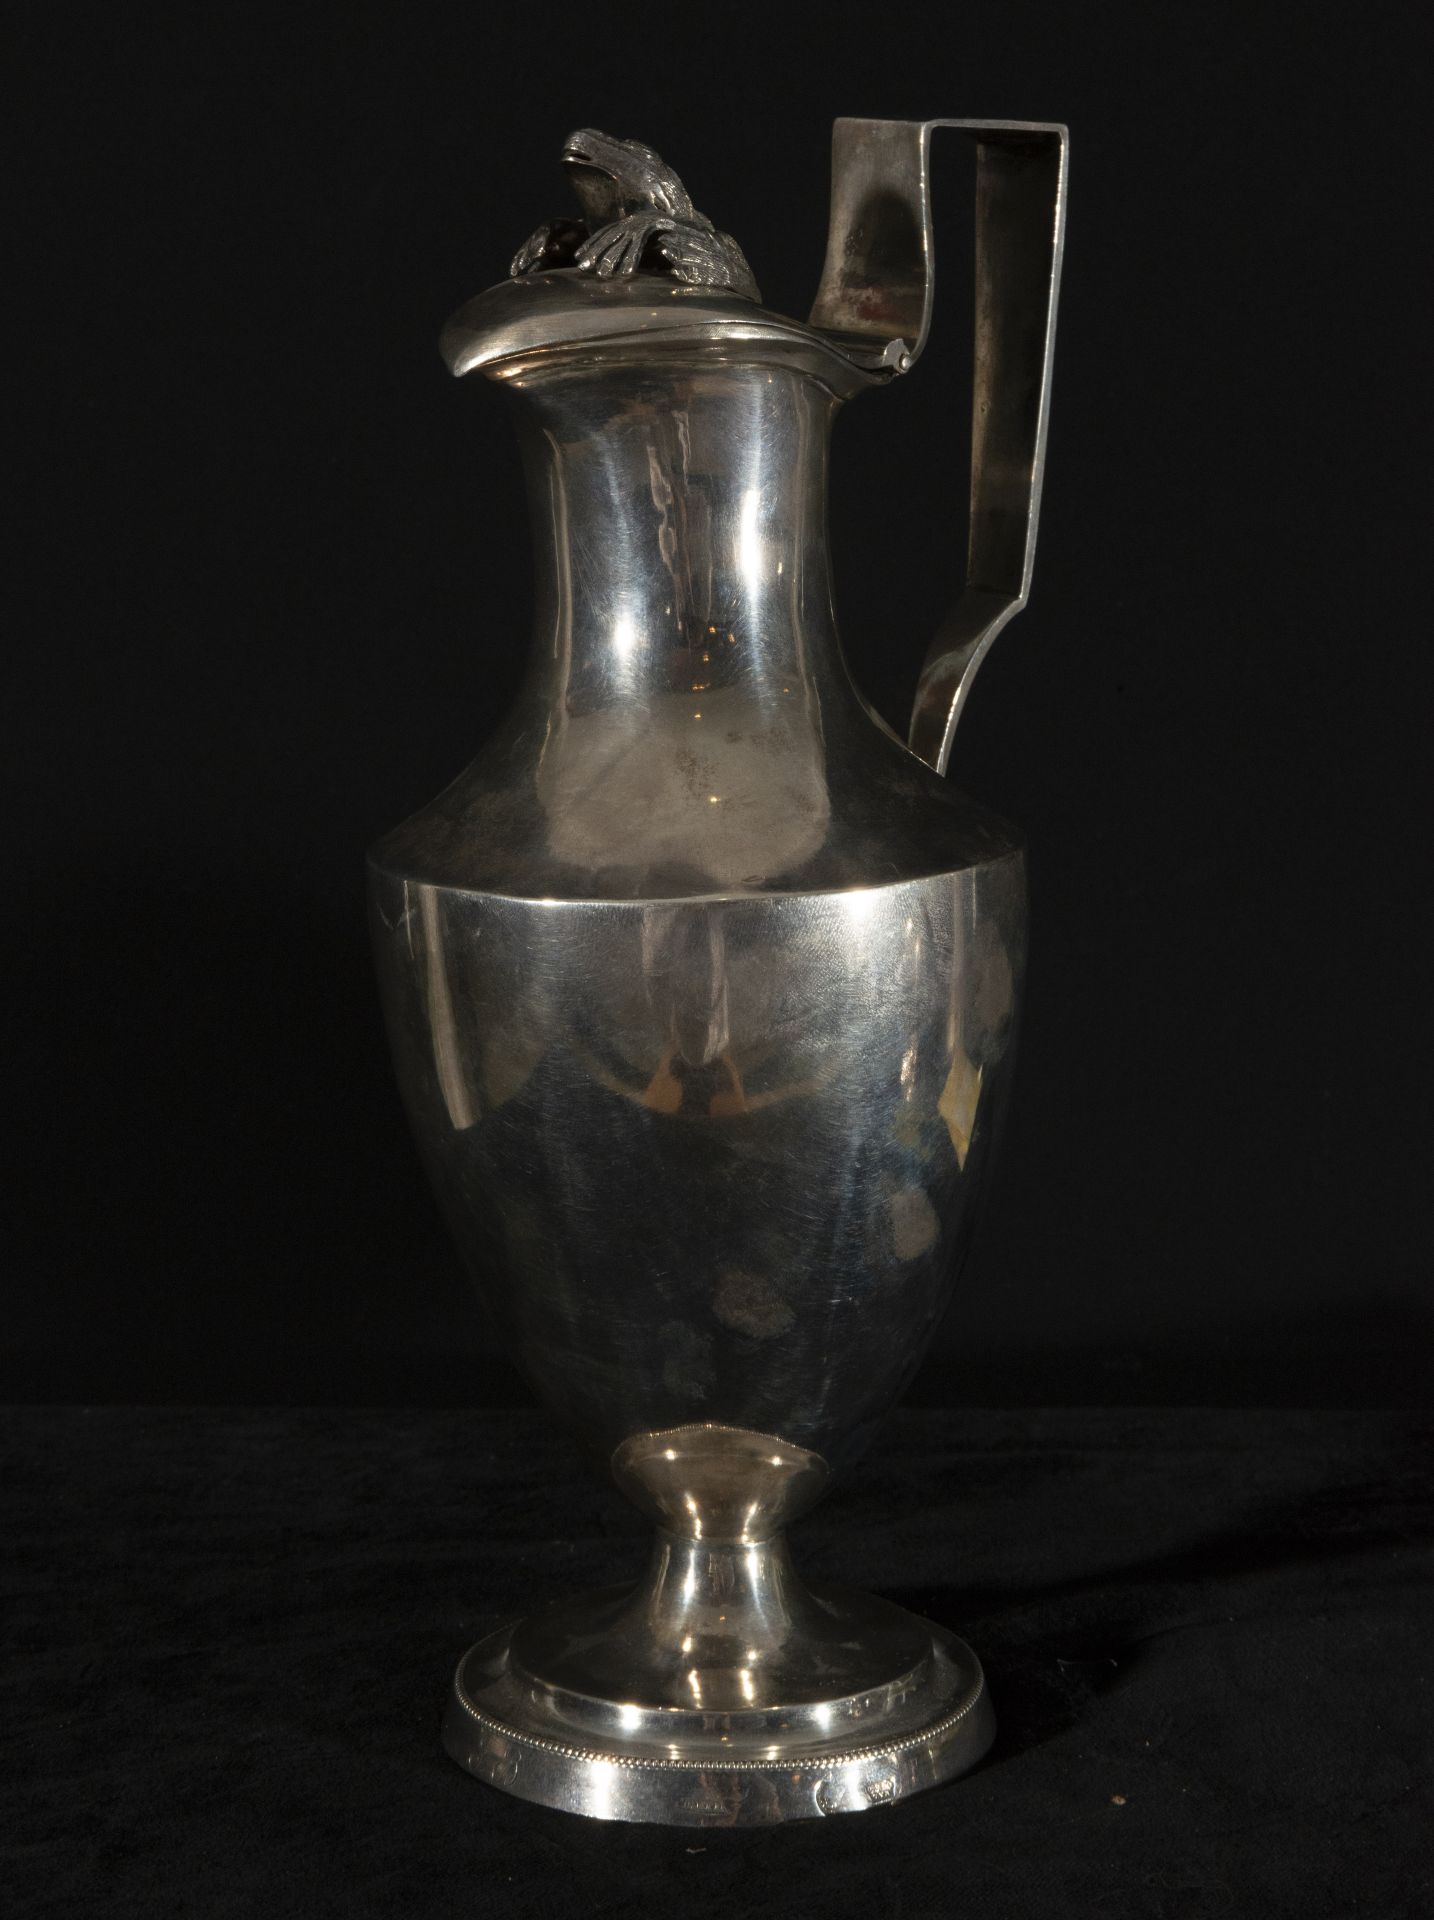 Set of sterling silver pitcher and salt in Spanish silver, late XVIII century, Cordoba marks - Image 3 of 7